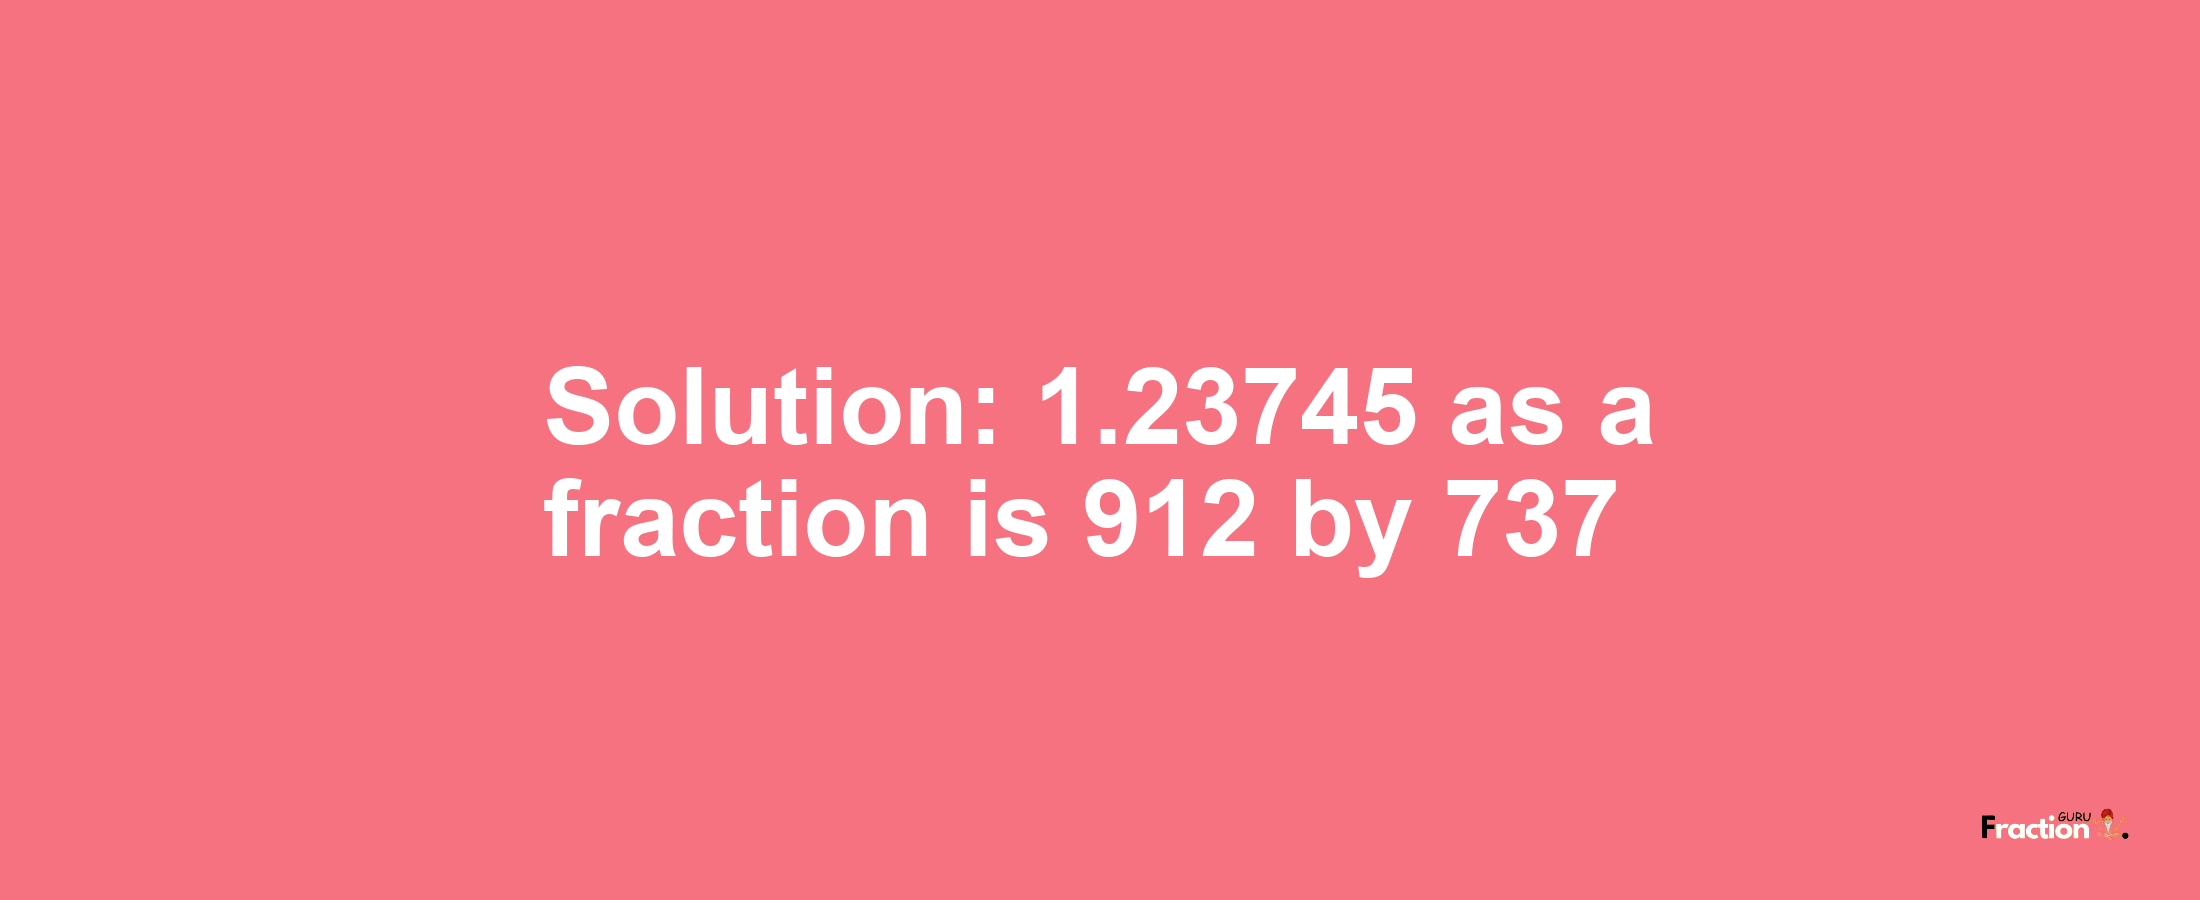 Solution:1.23745 as a fraction is 912/737